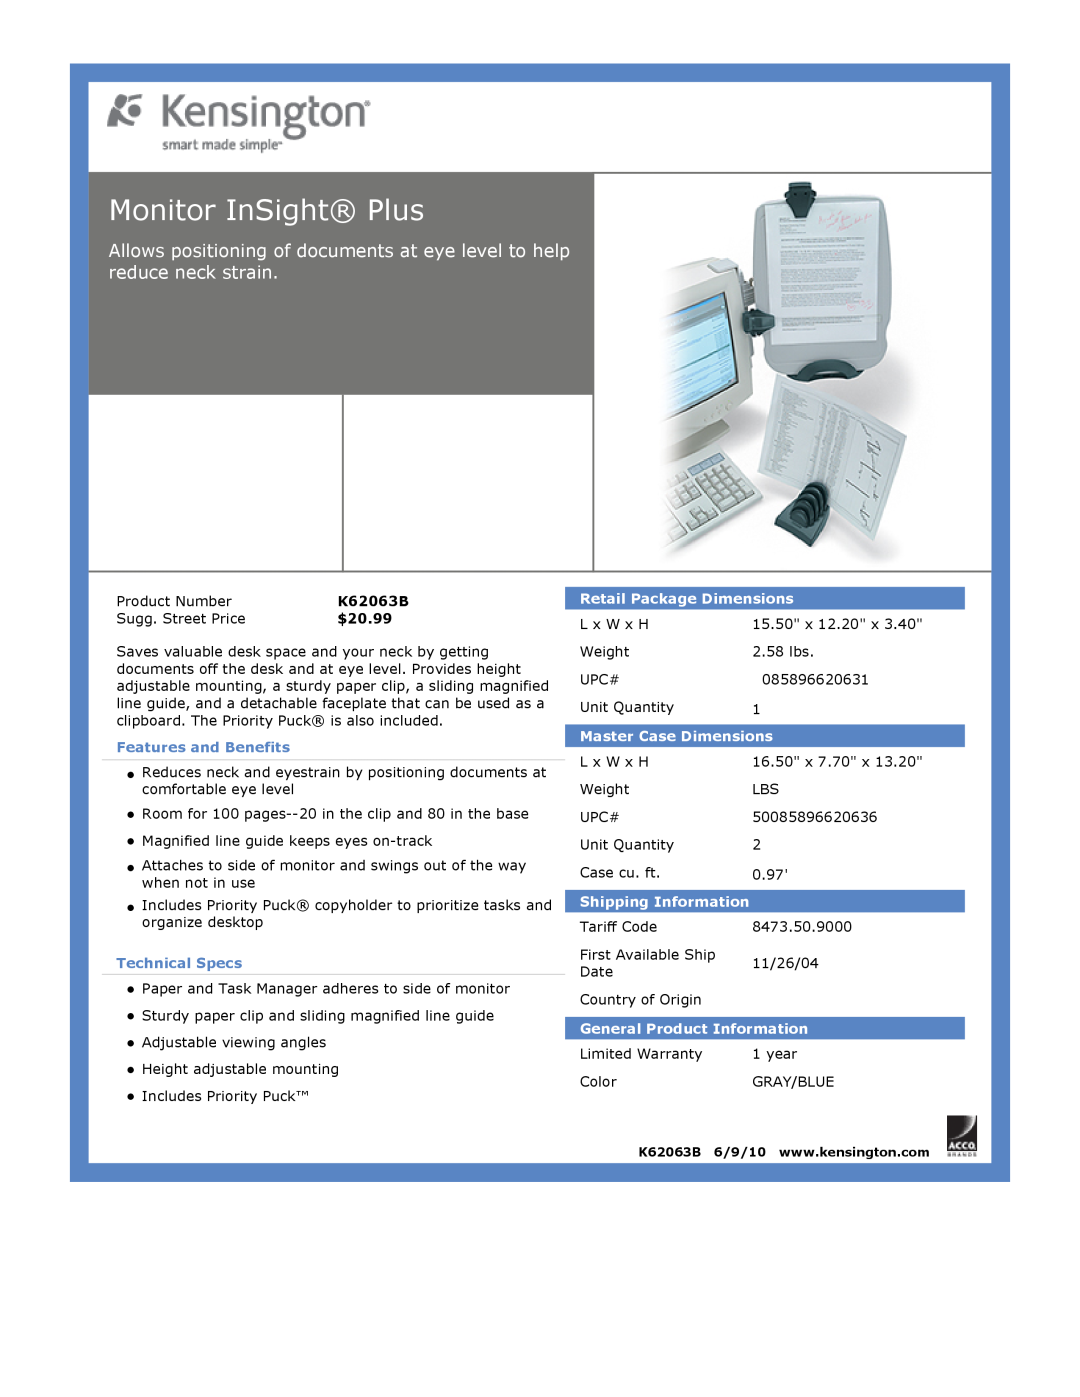 Kensington EU64325 Monitor InSight Plus, $20.99, Features and Benefits, Technical Specs, Retail Package Dimensions 